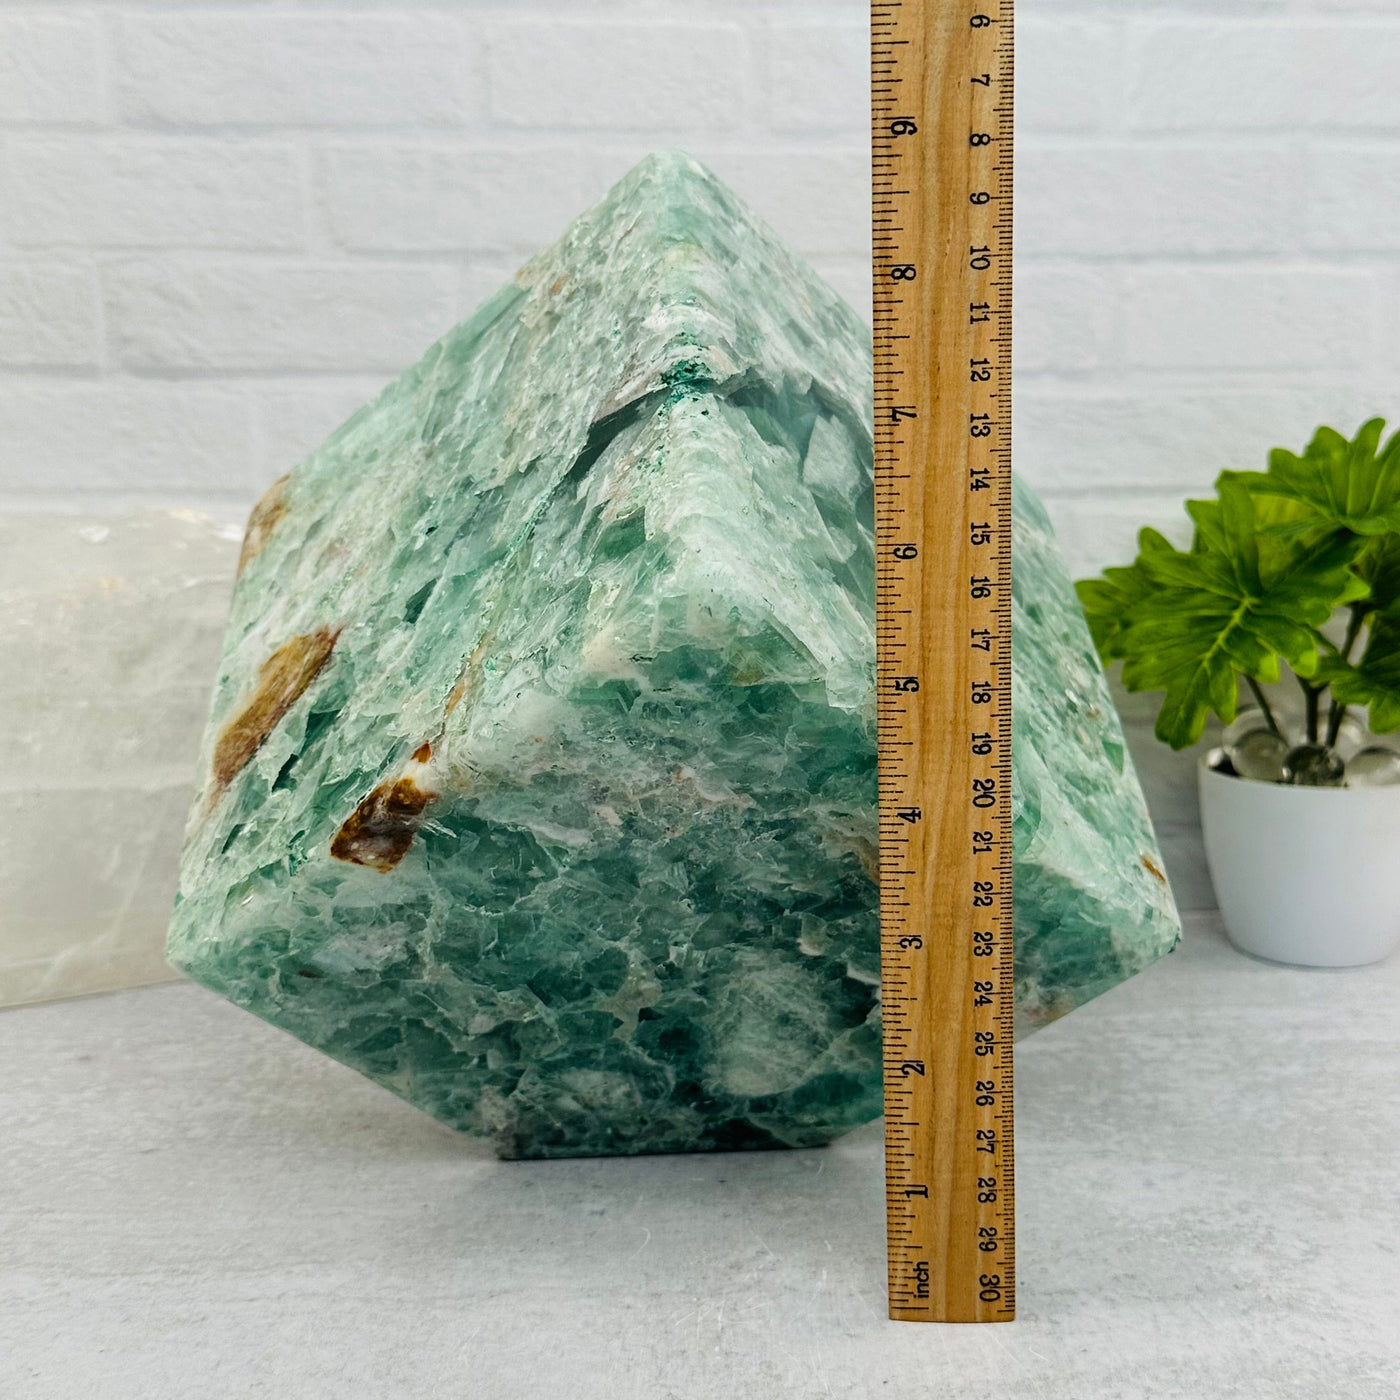 fluorite cube next to a ruler for size reference 